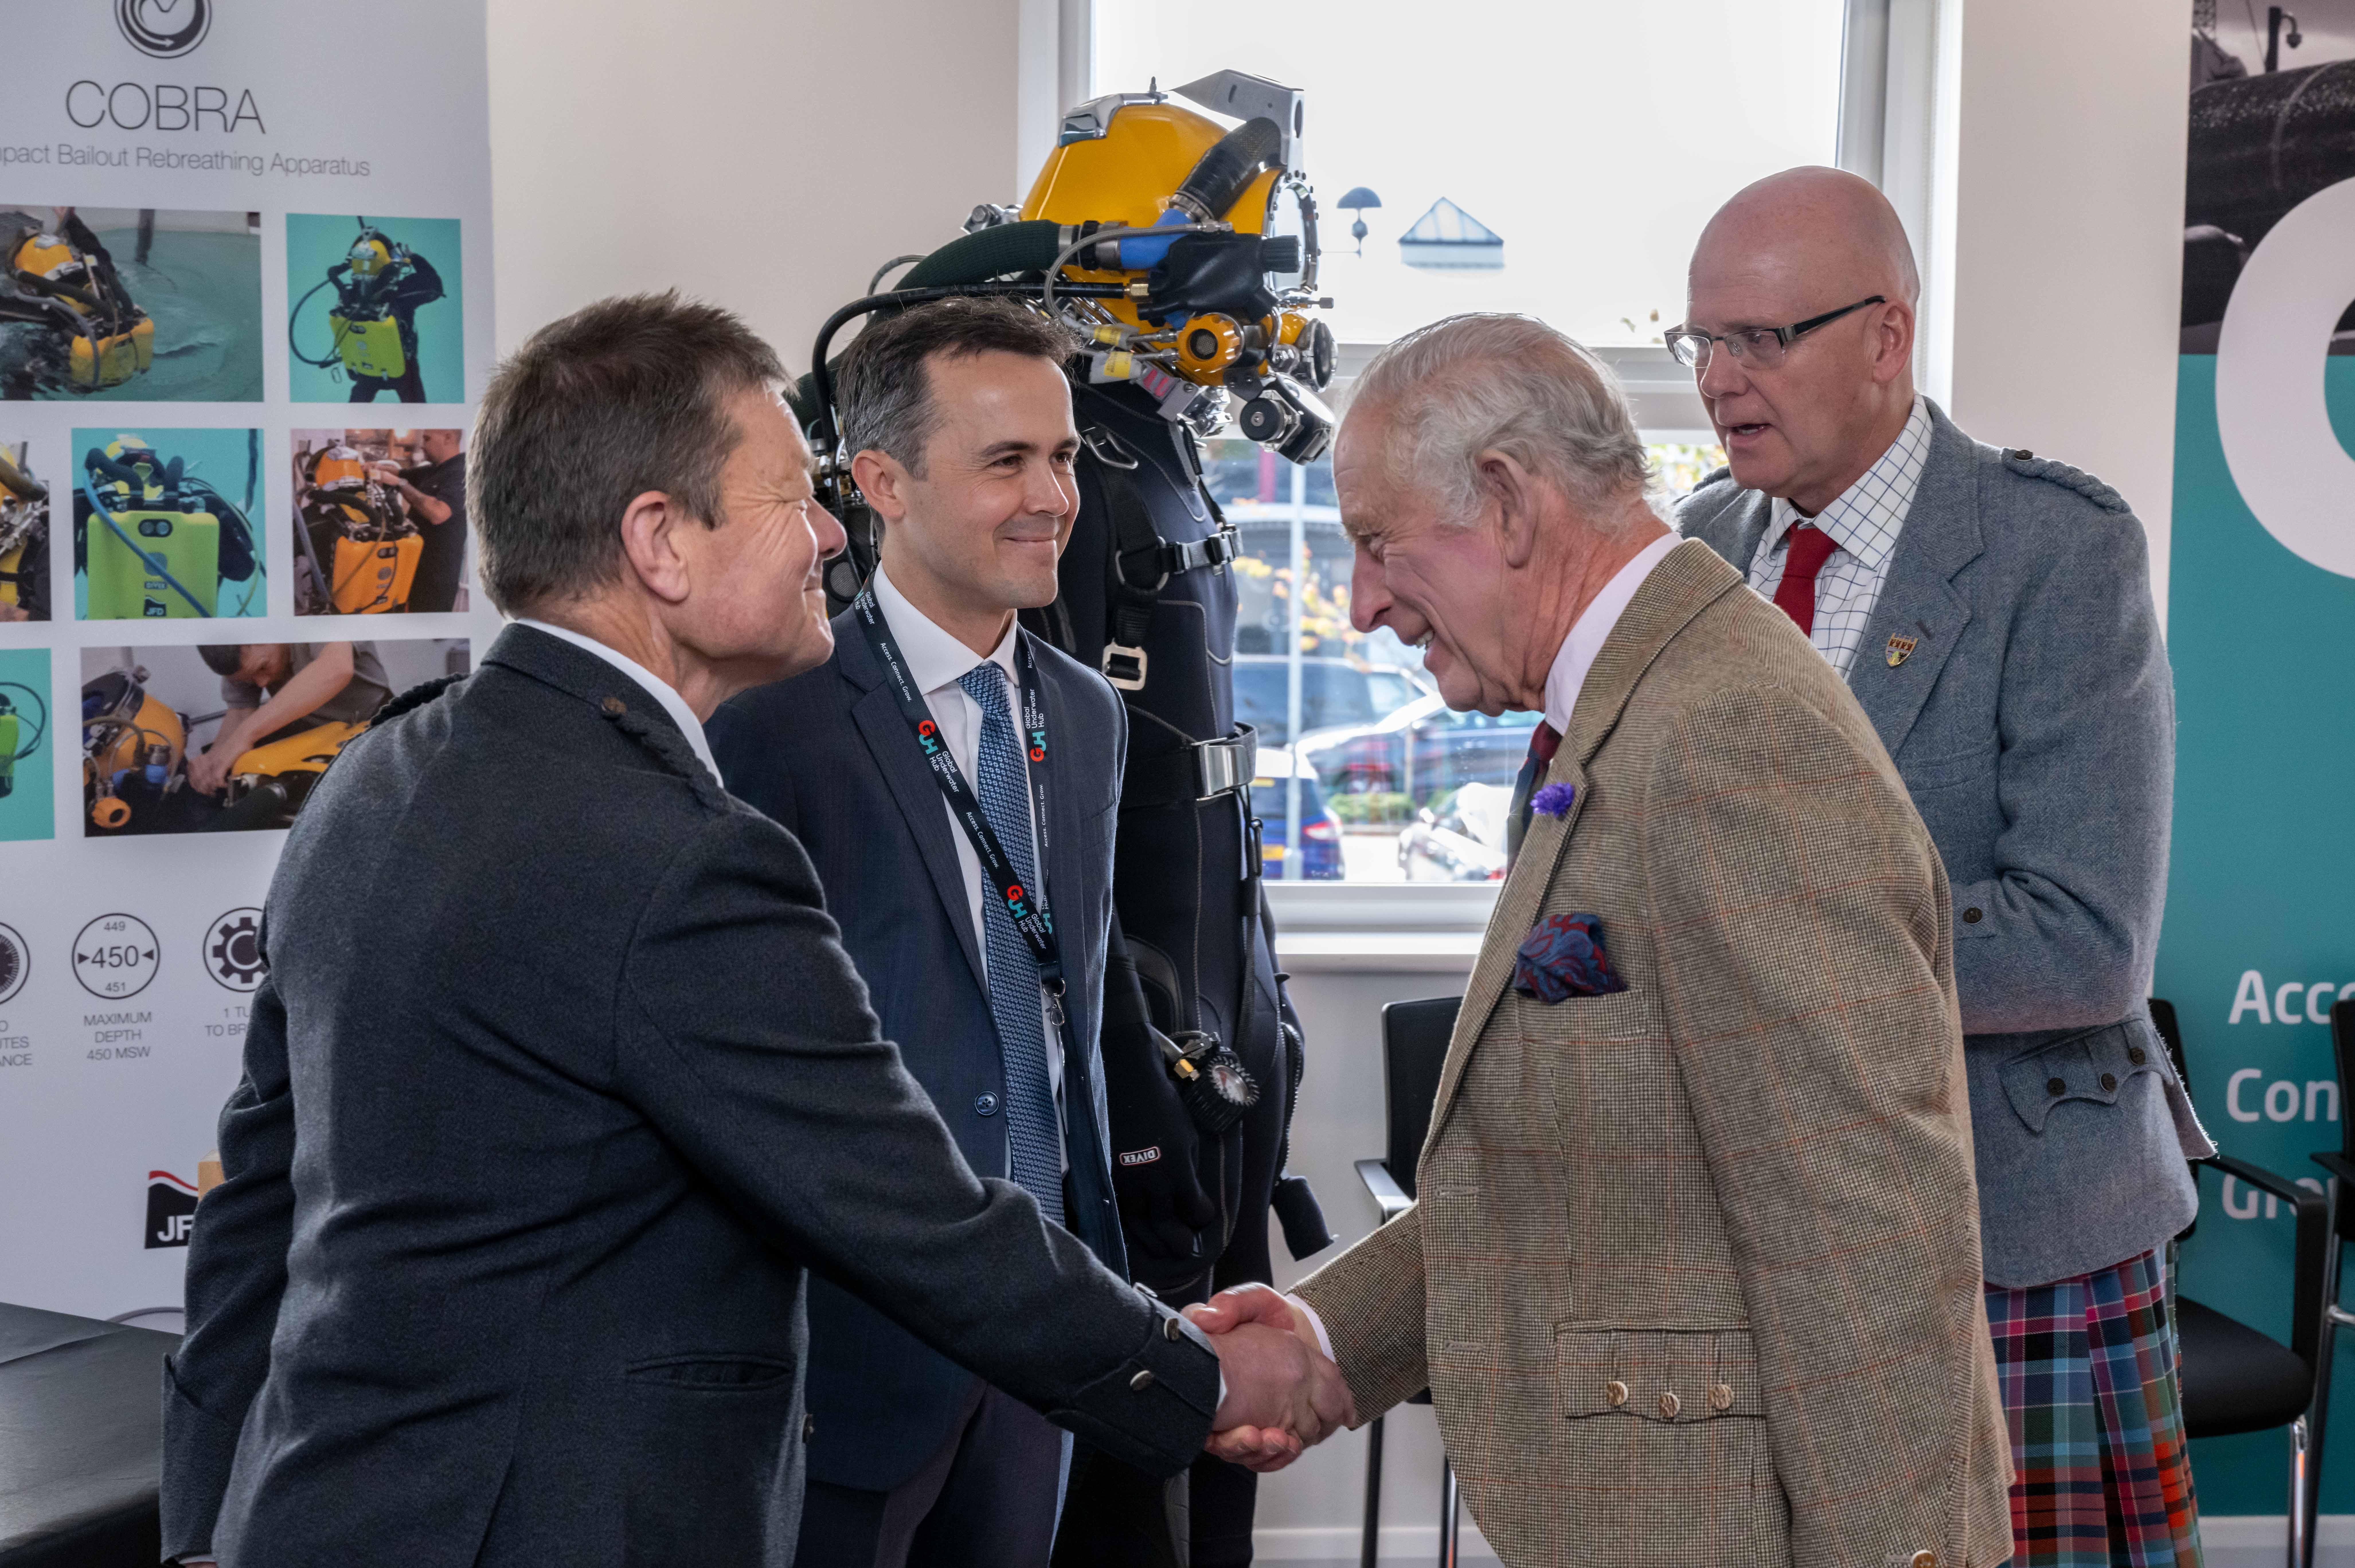 MEMBER NEWS: JFD showcases 42 years of subsea innovation to His Royal Highness, King Charles III at Aberdeen’s Global Underwater Hub